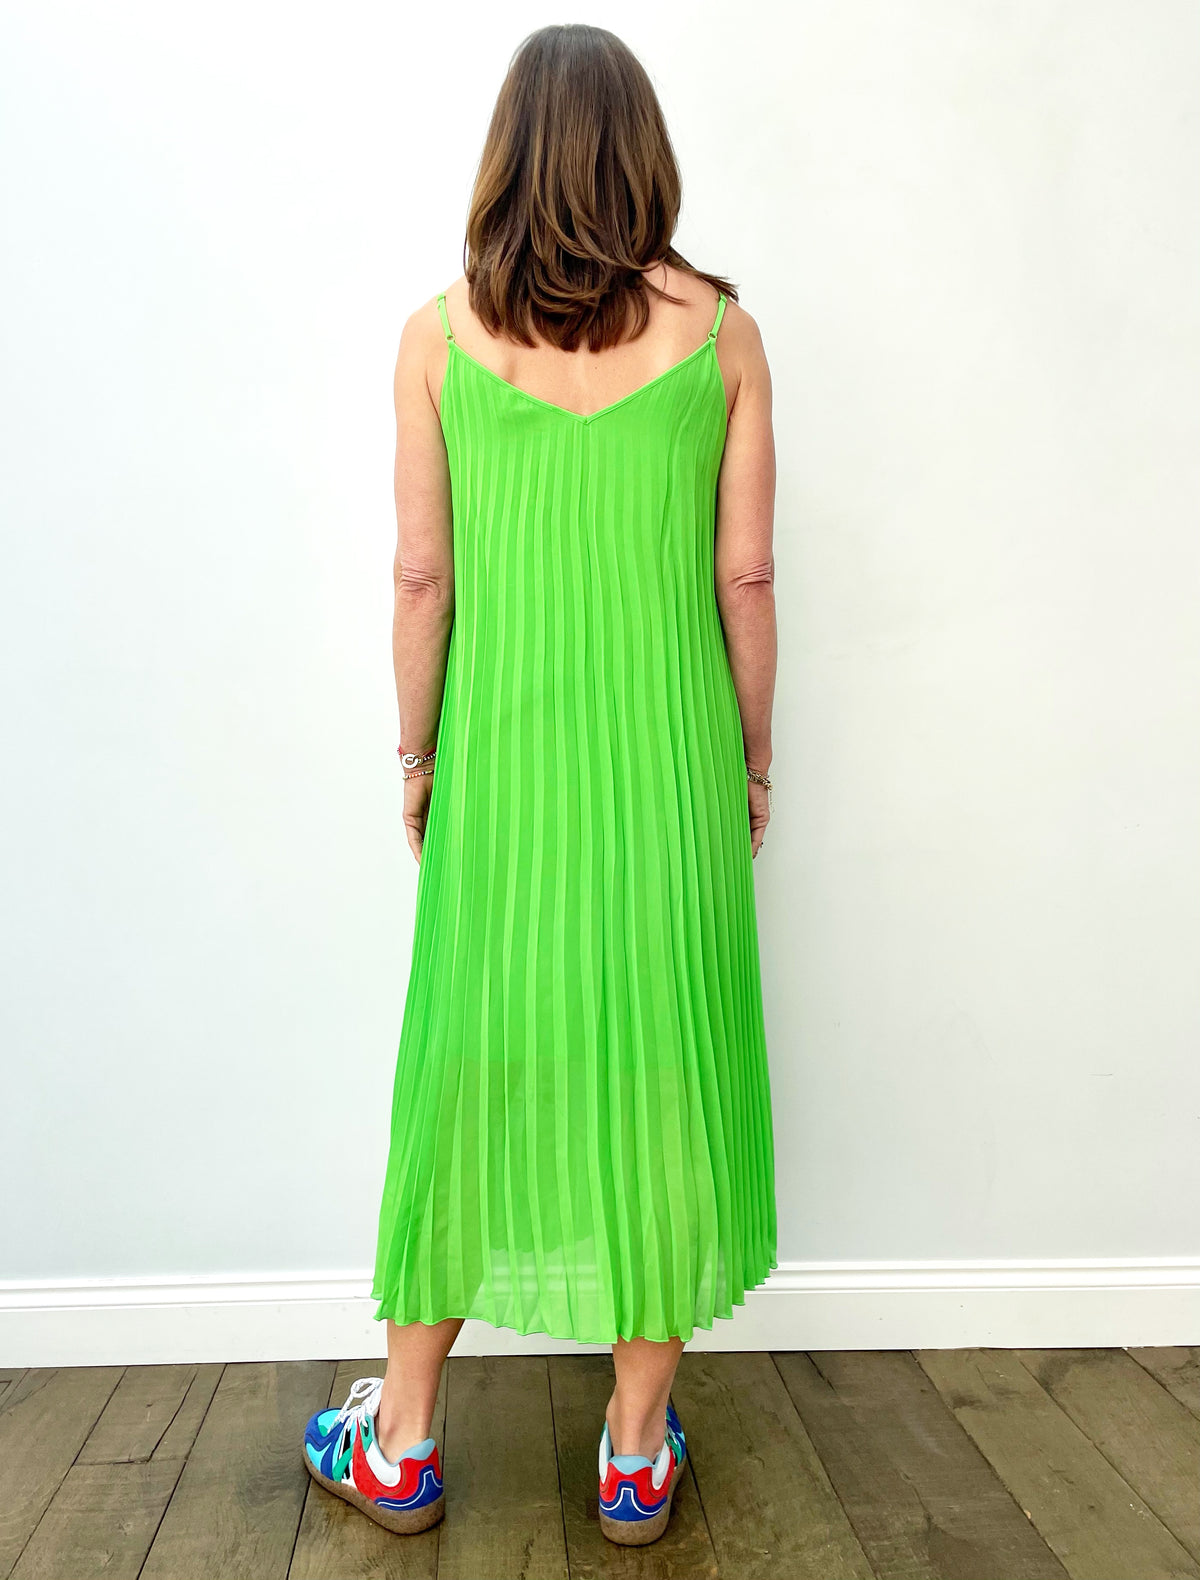 EA Zague Pleated Slipdress in Flash Lime